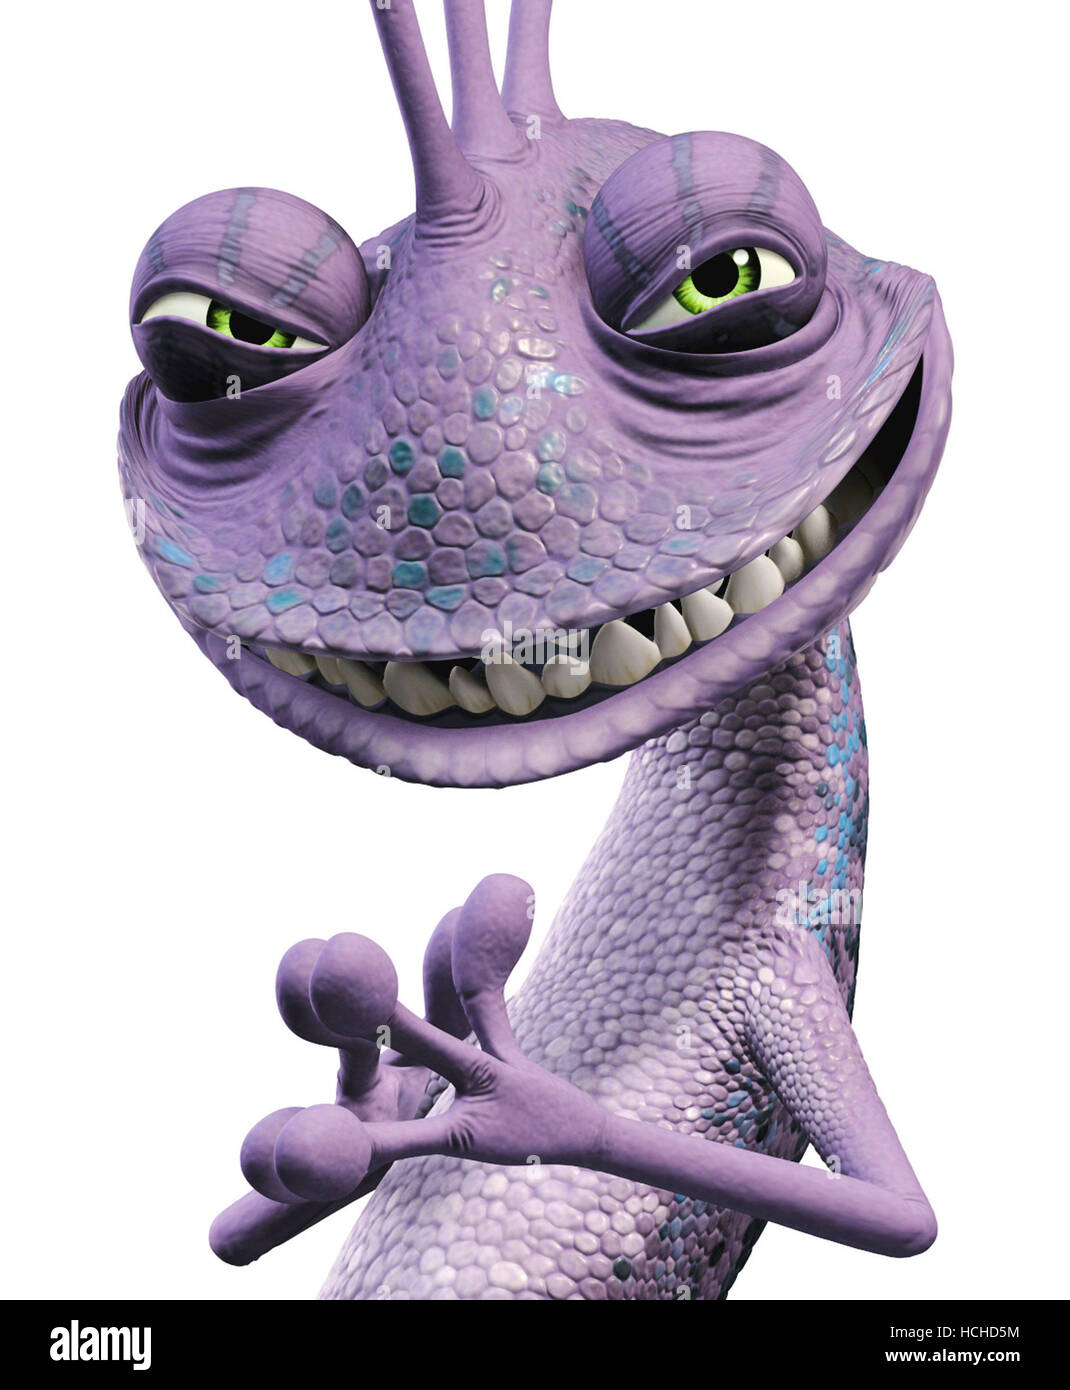 MONSTERS INC., Randall Boggs, 2001 Stock Photo